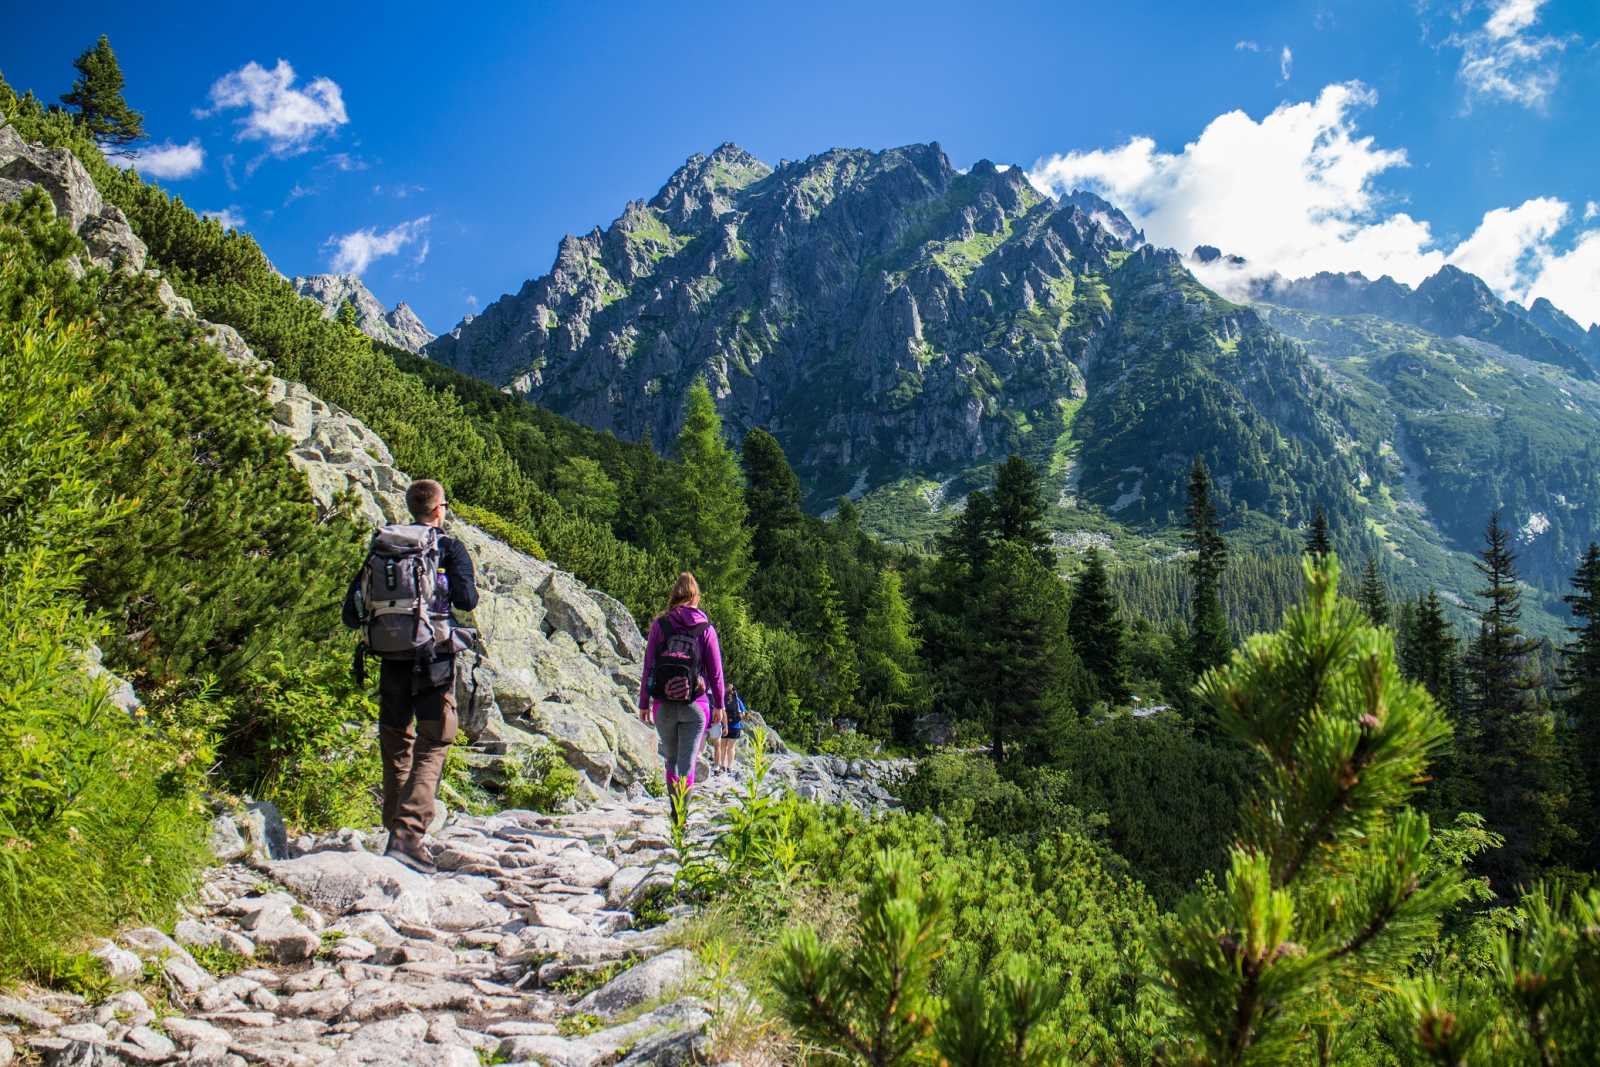 Hike Slovakia’s High Tatras Mountains in a Weekend | Much Better Adventures